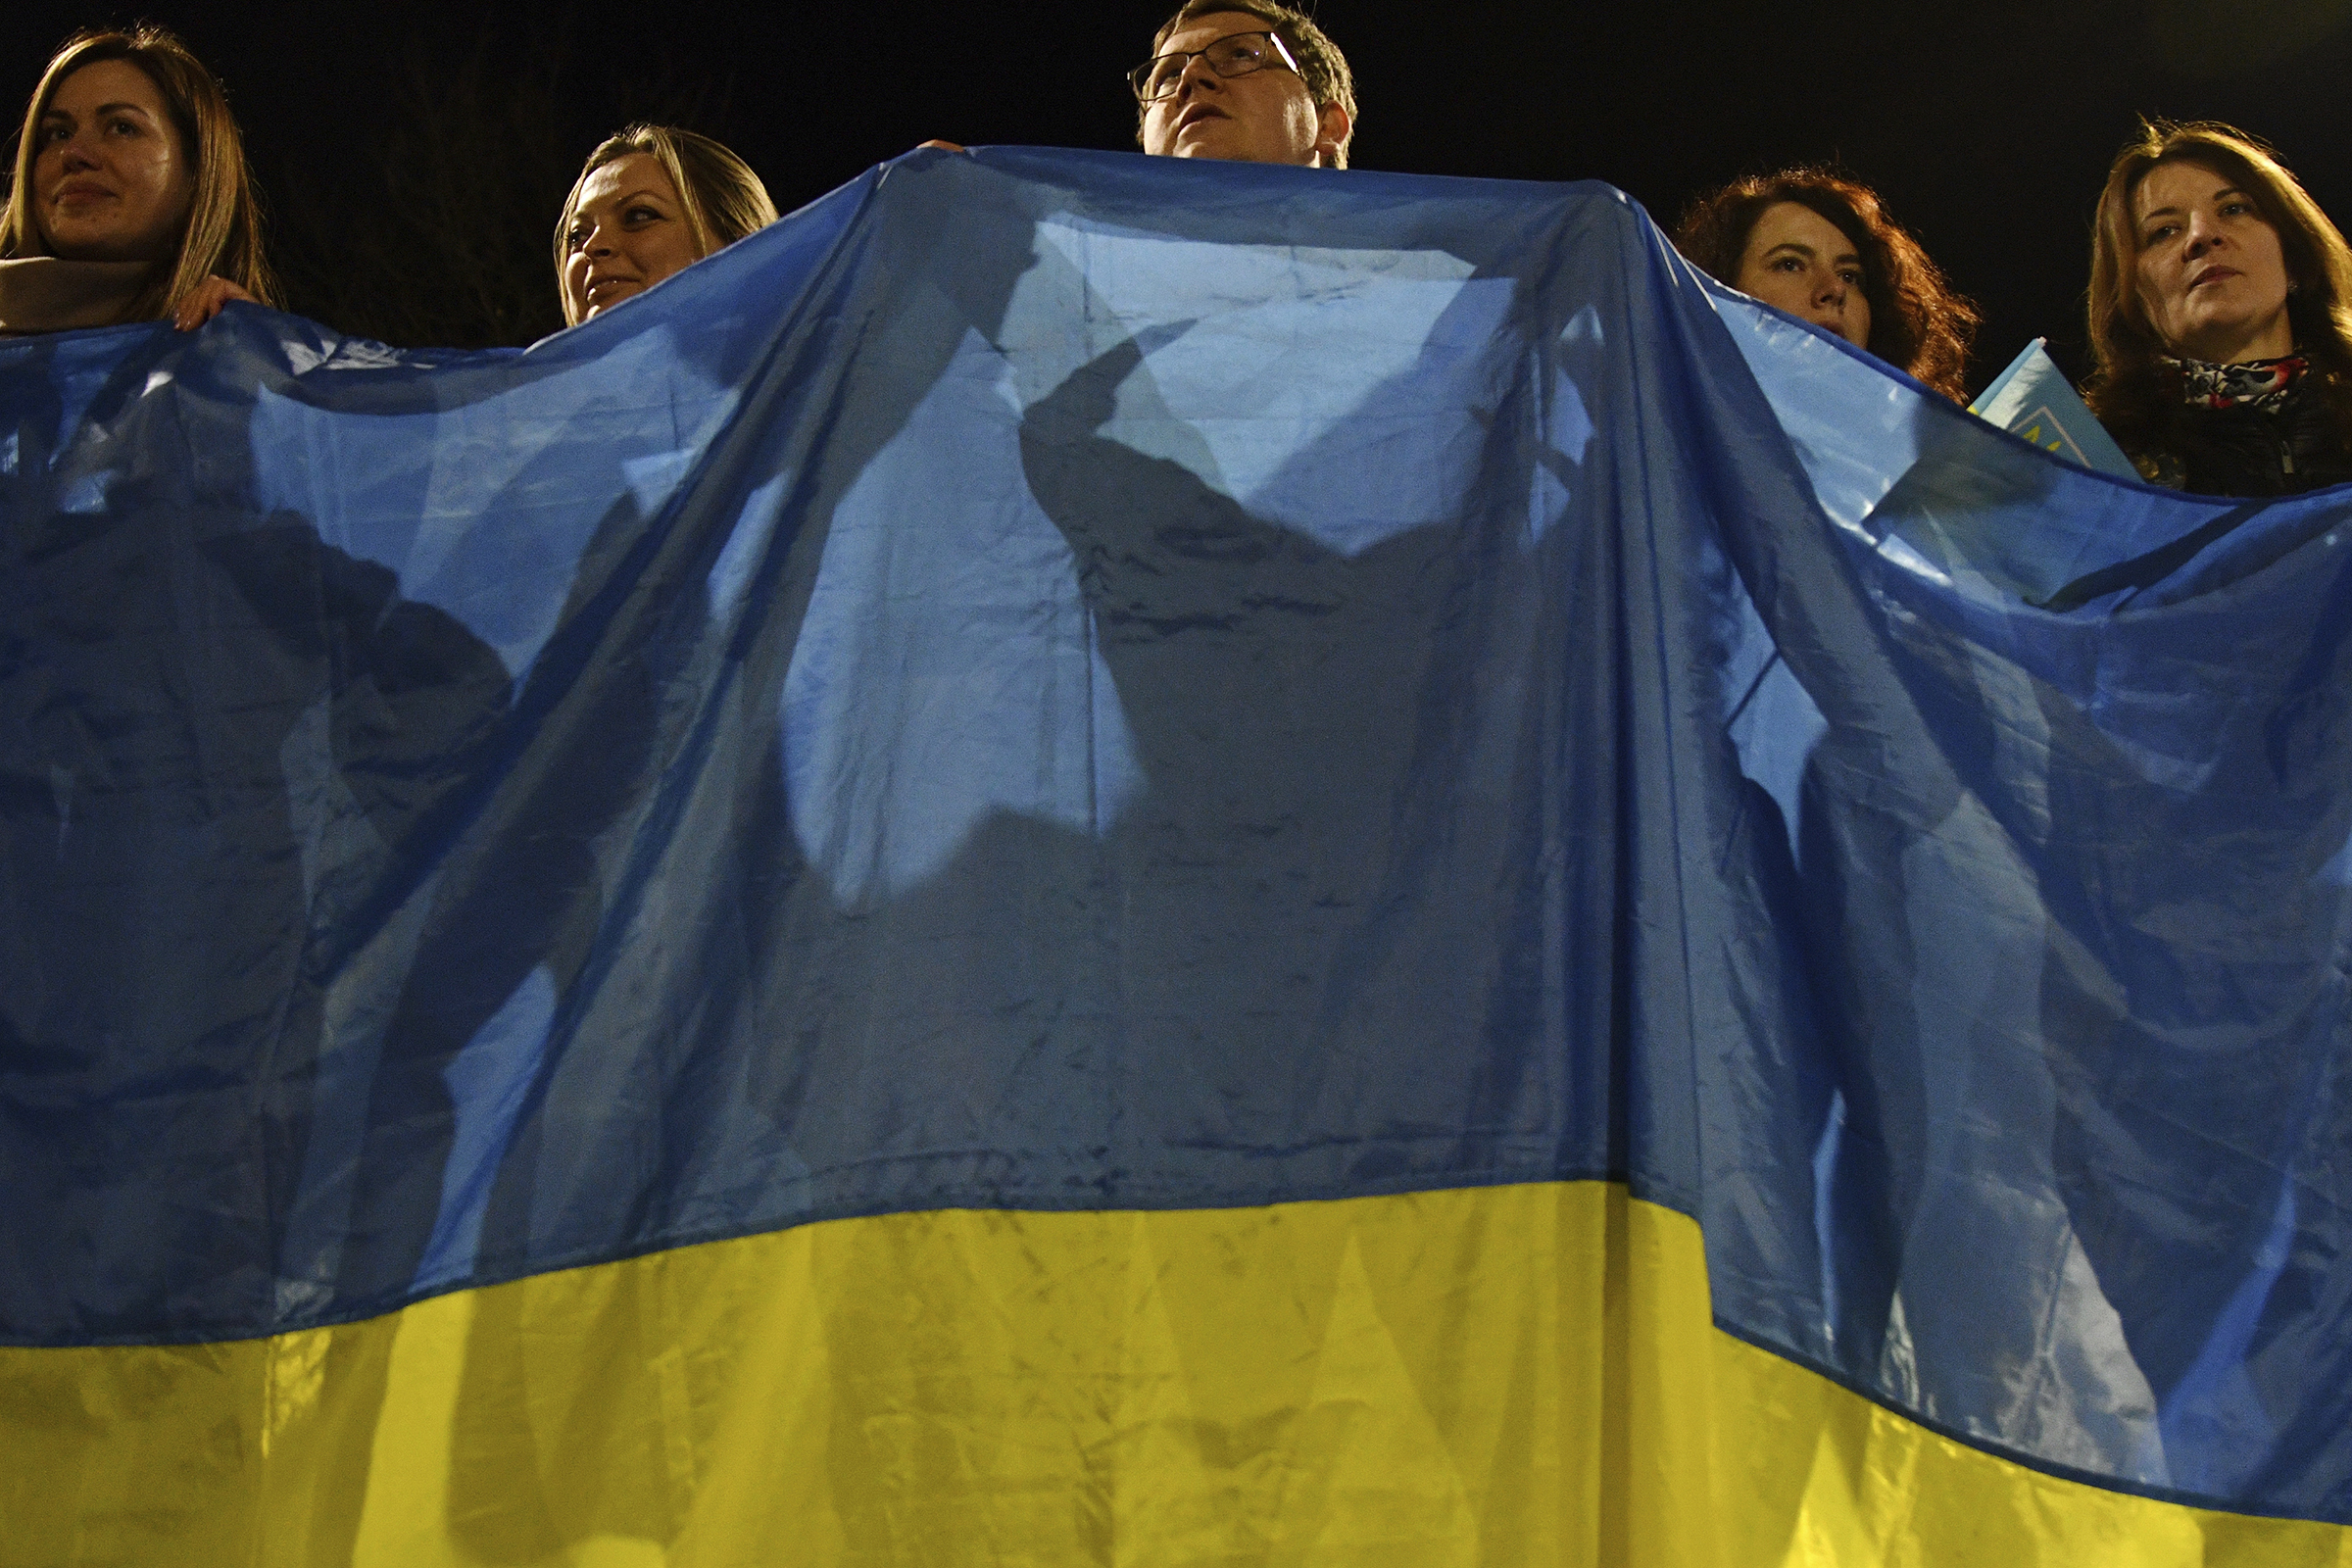 People wave a huge Ukrainian national flag during an action in support of their country in Kramatorsk, Ukraine, Wednesday, Feb. 23, 2022. (Andriy Andriyenko—AP)